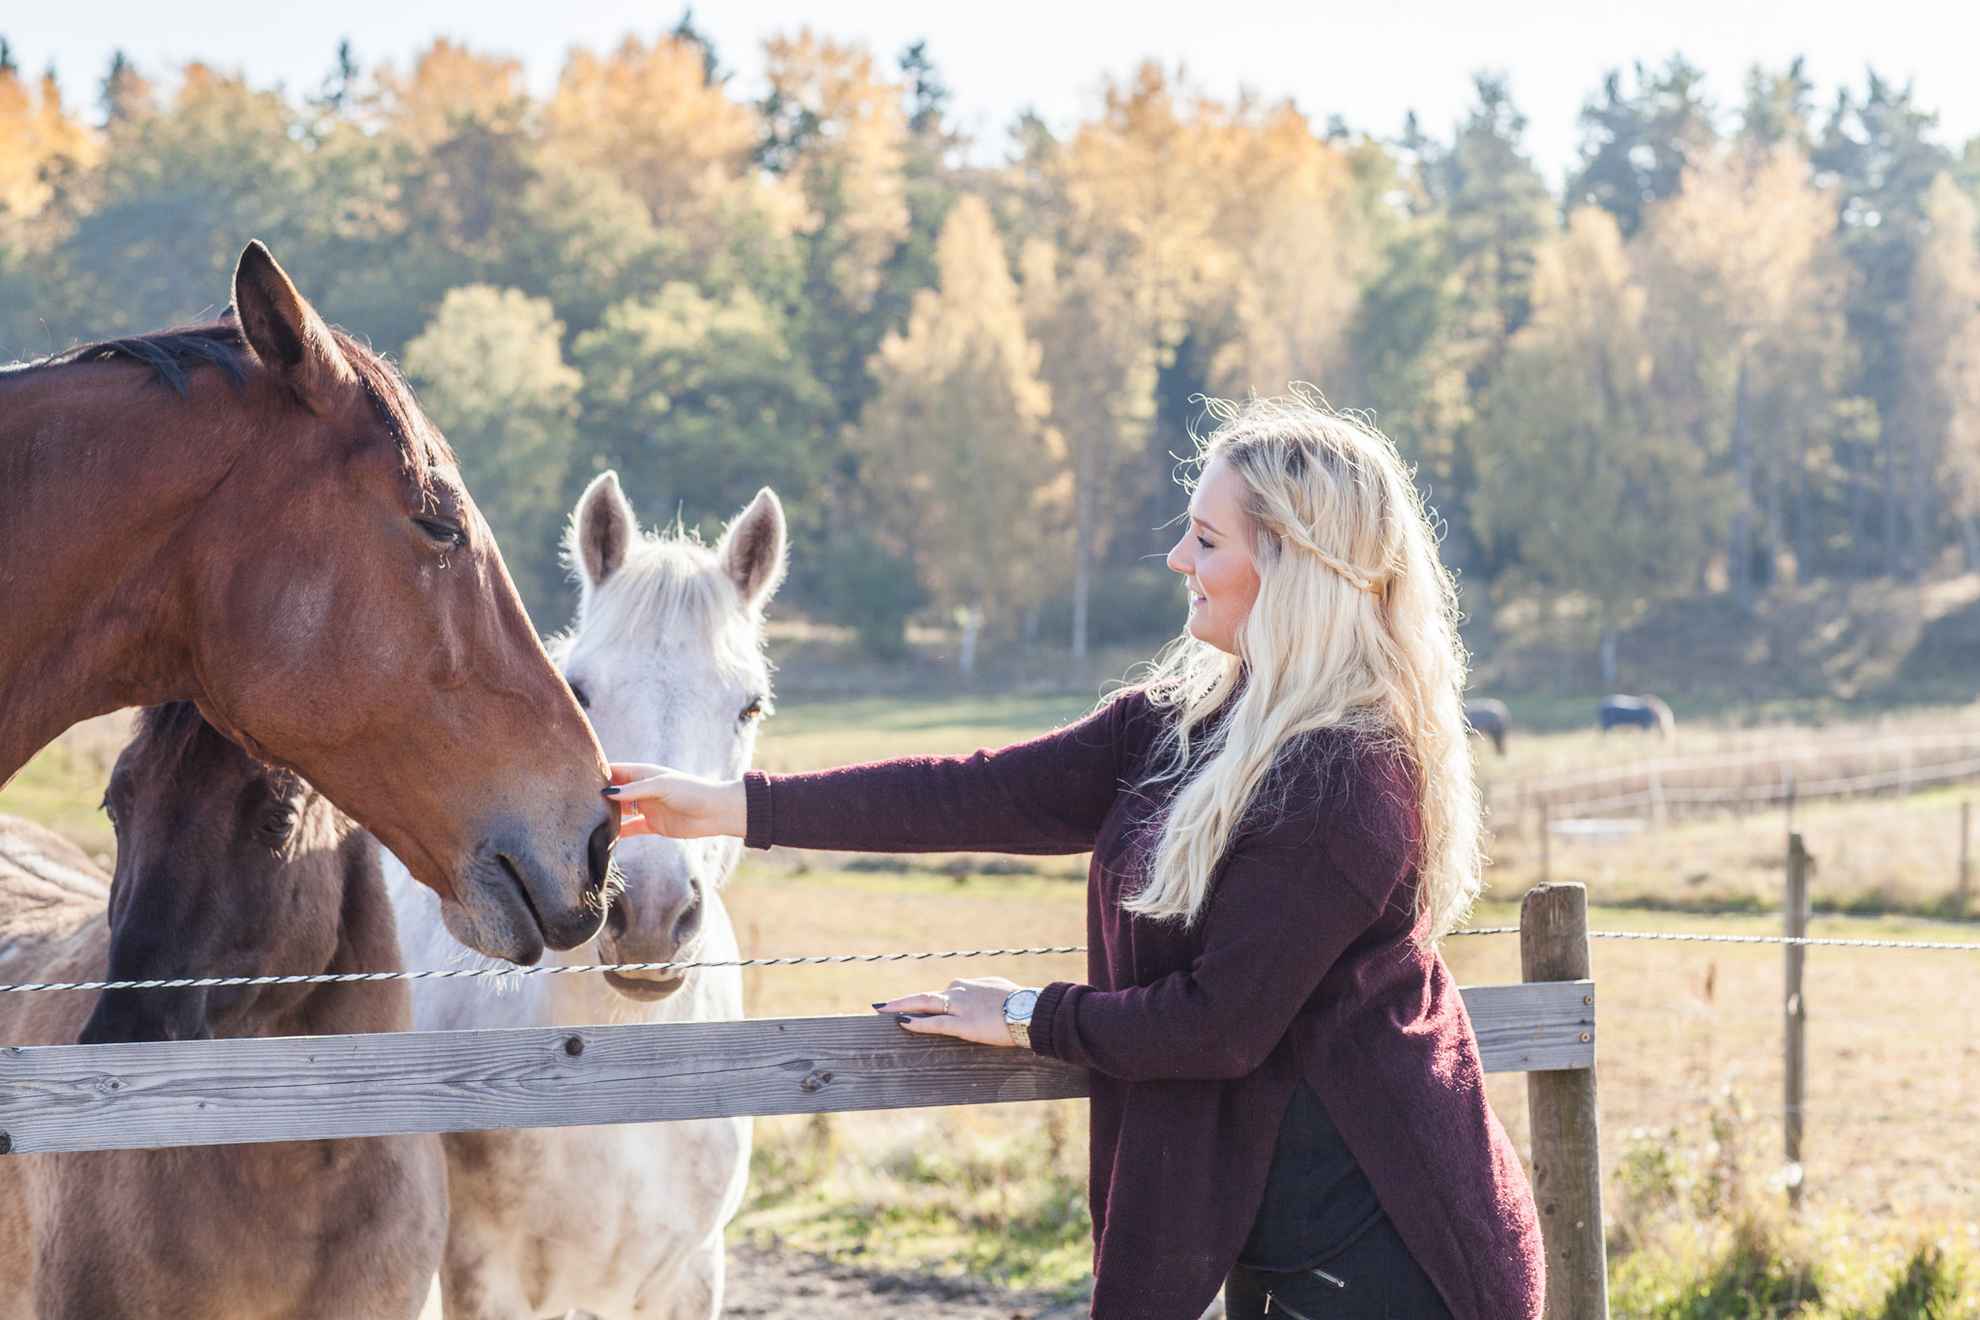 A blond woman petting a brown horse.